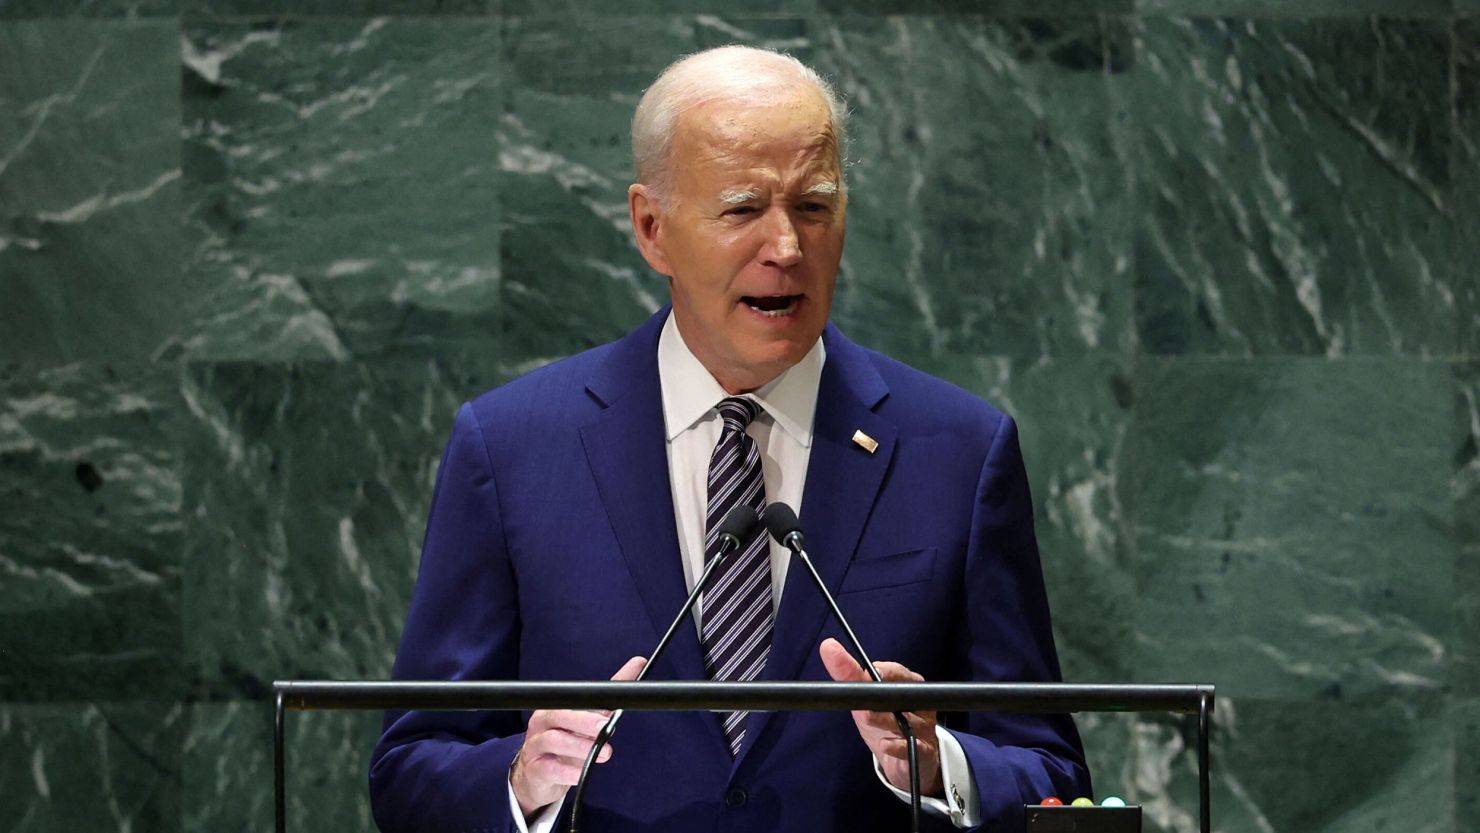 US President Joe Biden addresses the 78th Session of the UN General Assembly in New York on September 19. (Mike Segar/Reuters)